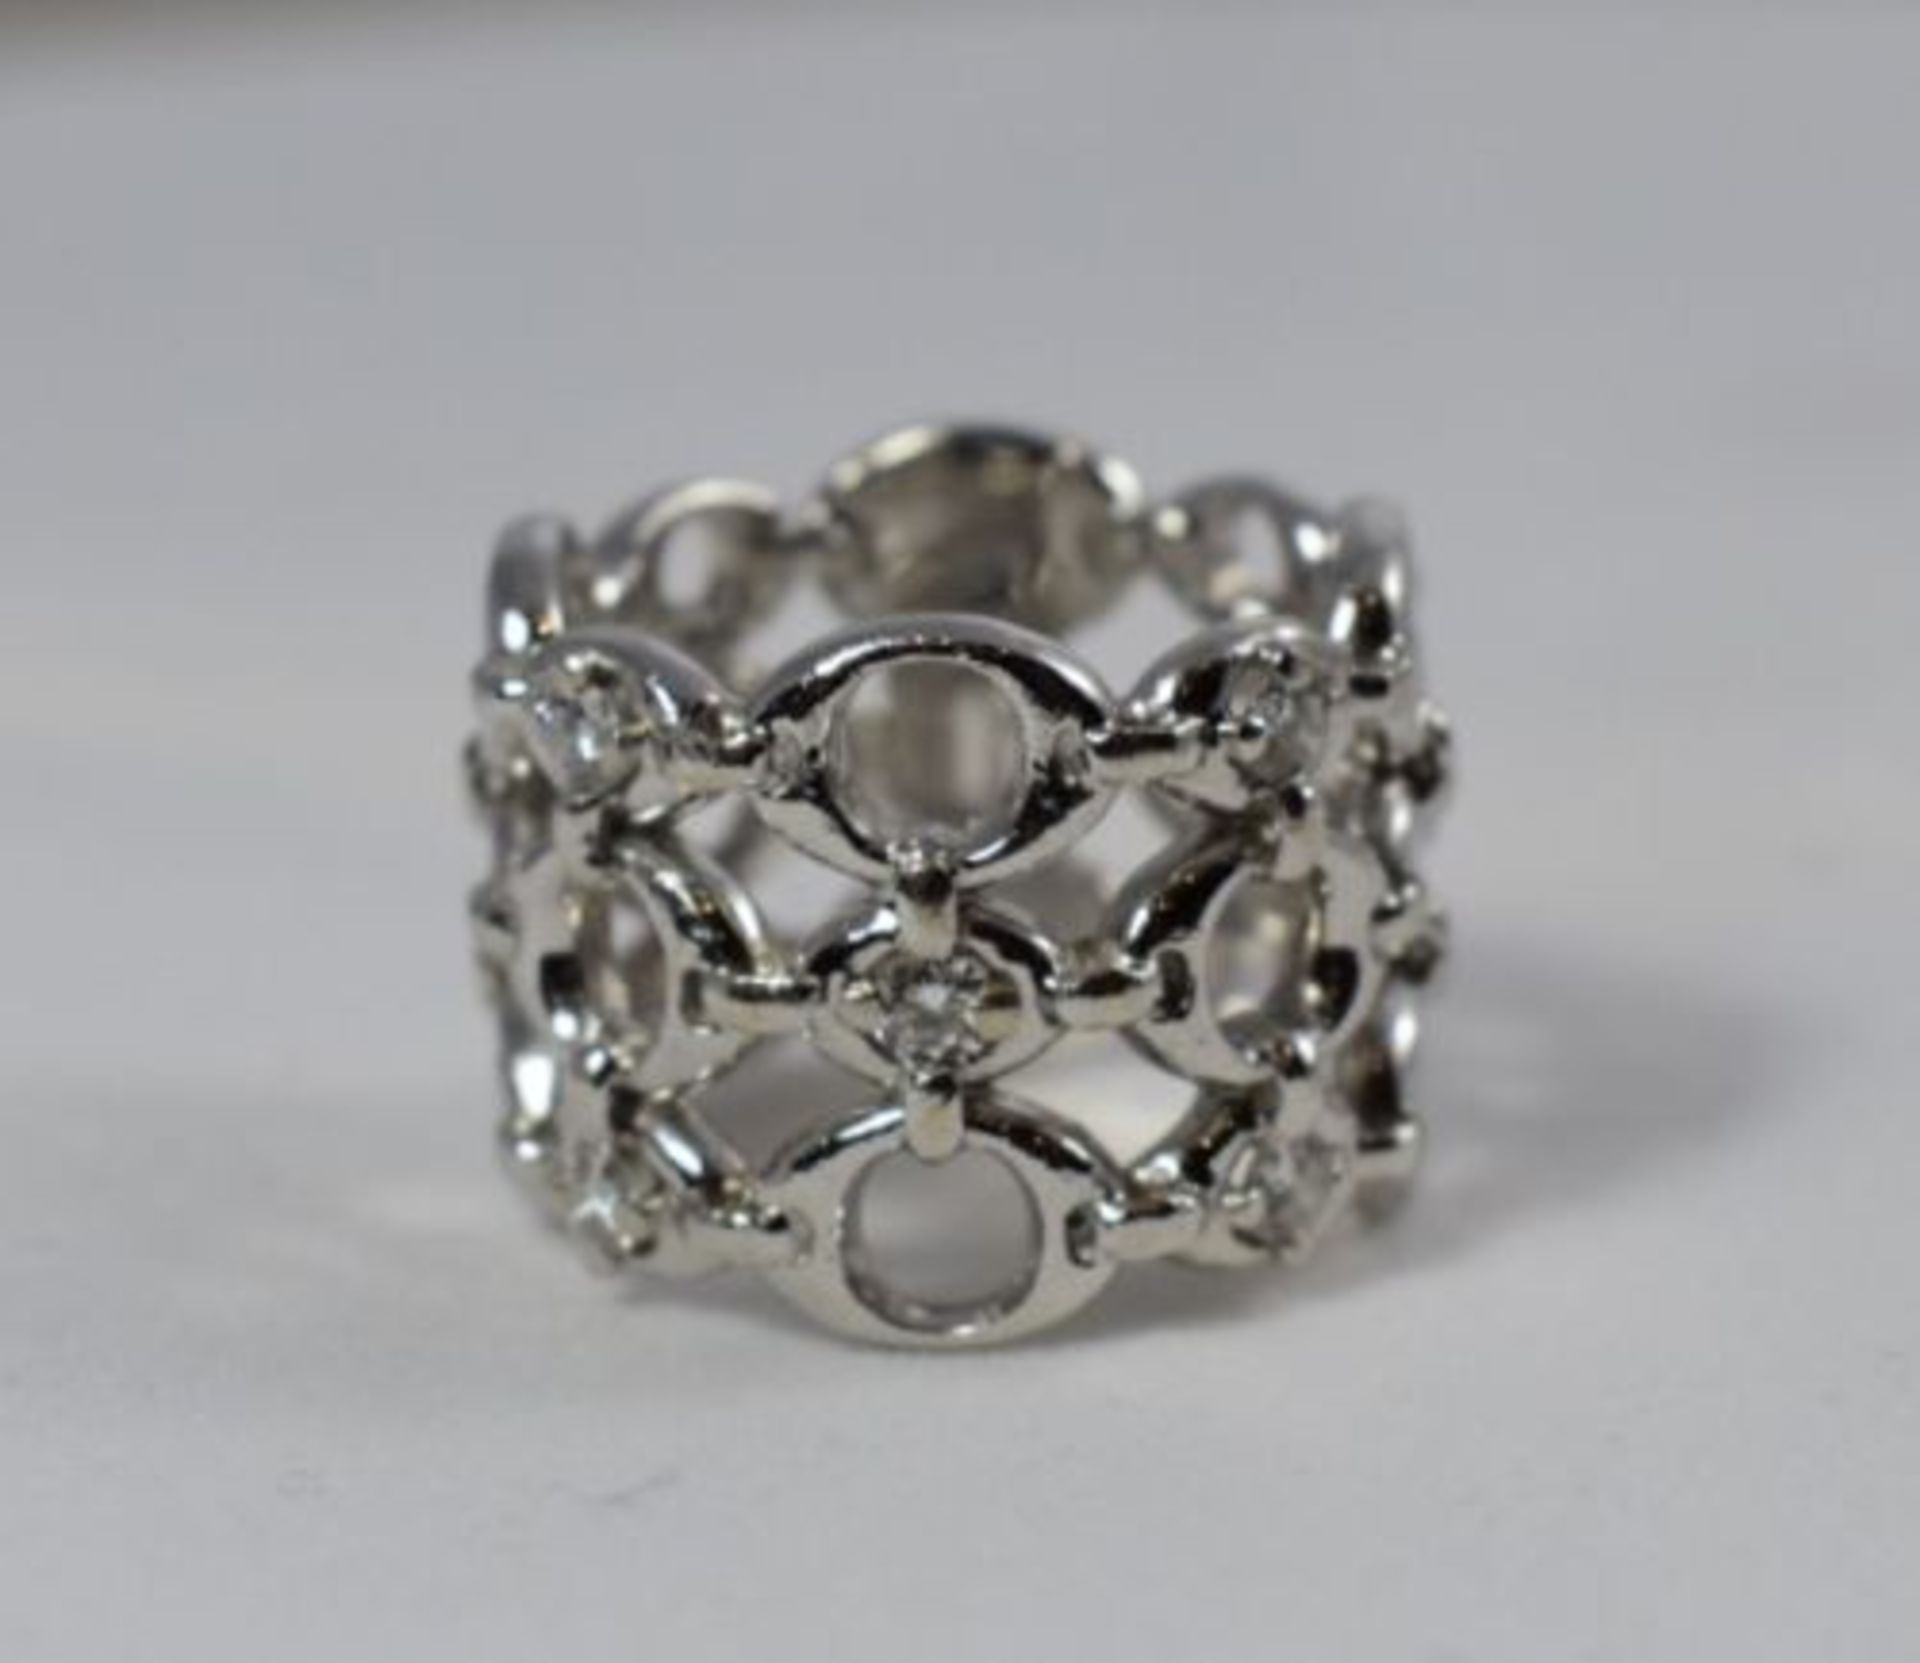 Christian Dior Diamond Ring set in 18 ct White Gold - Image 3 of 12